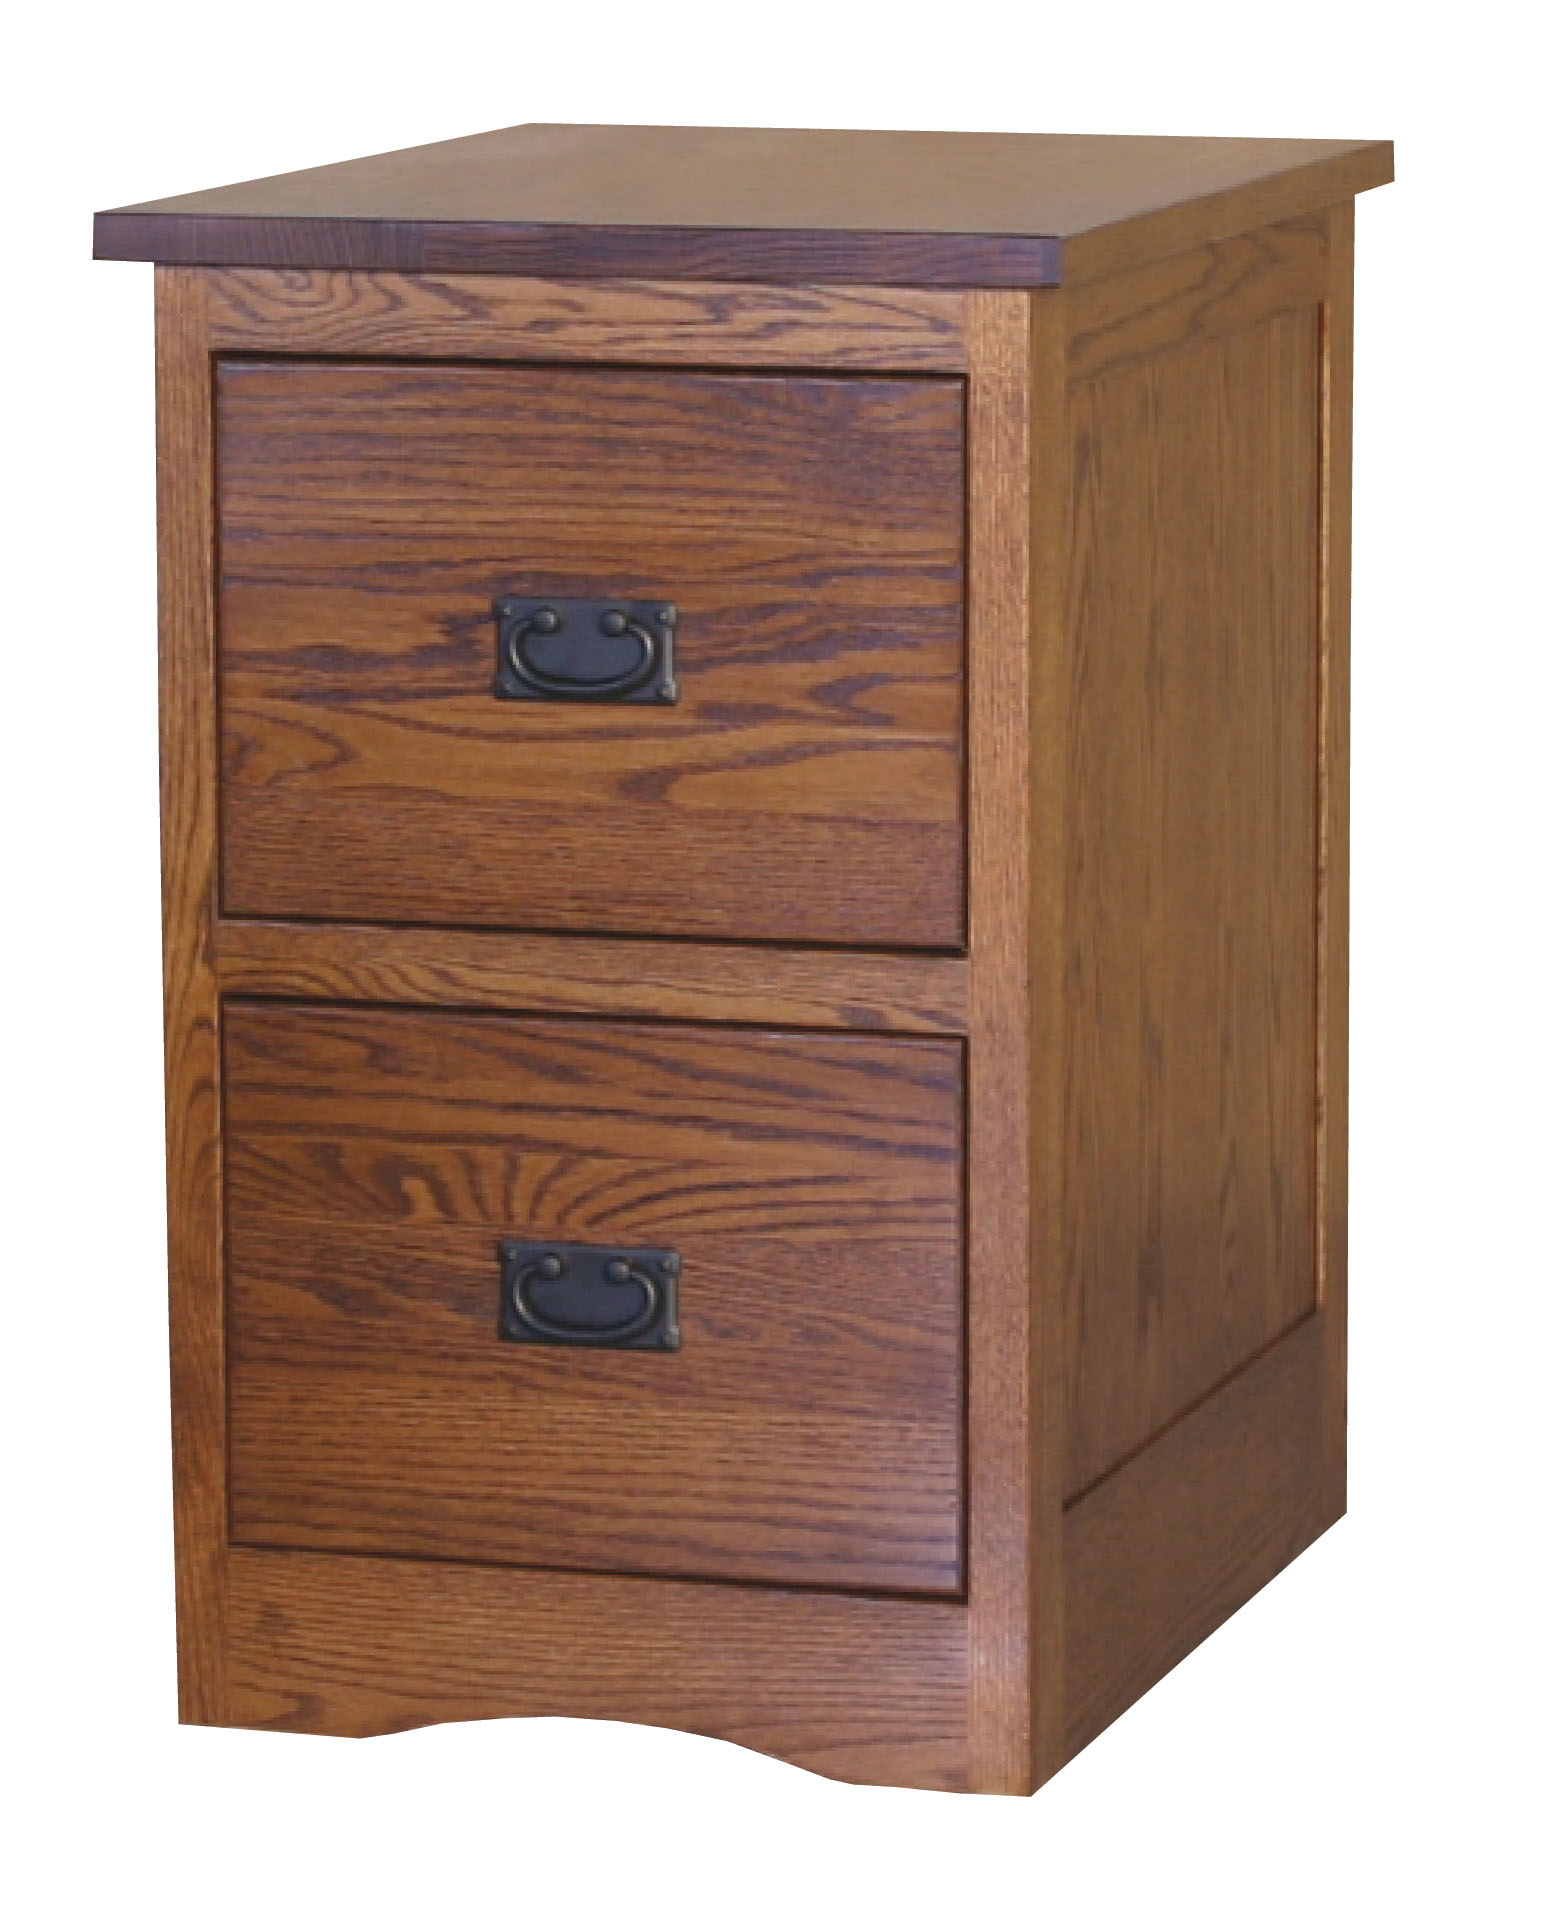 Mission Flush File Cabinets Amish Crafted Furniture intended for dimensions 1542 X 1917